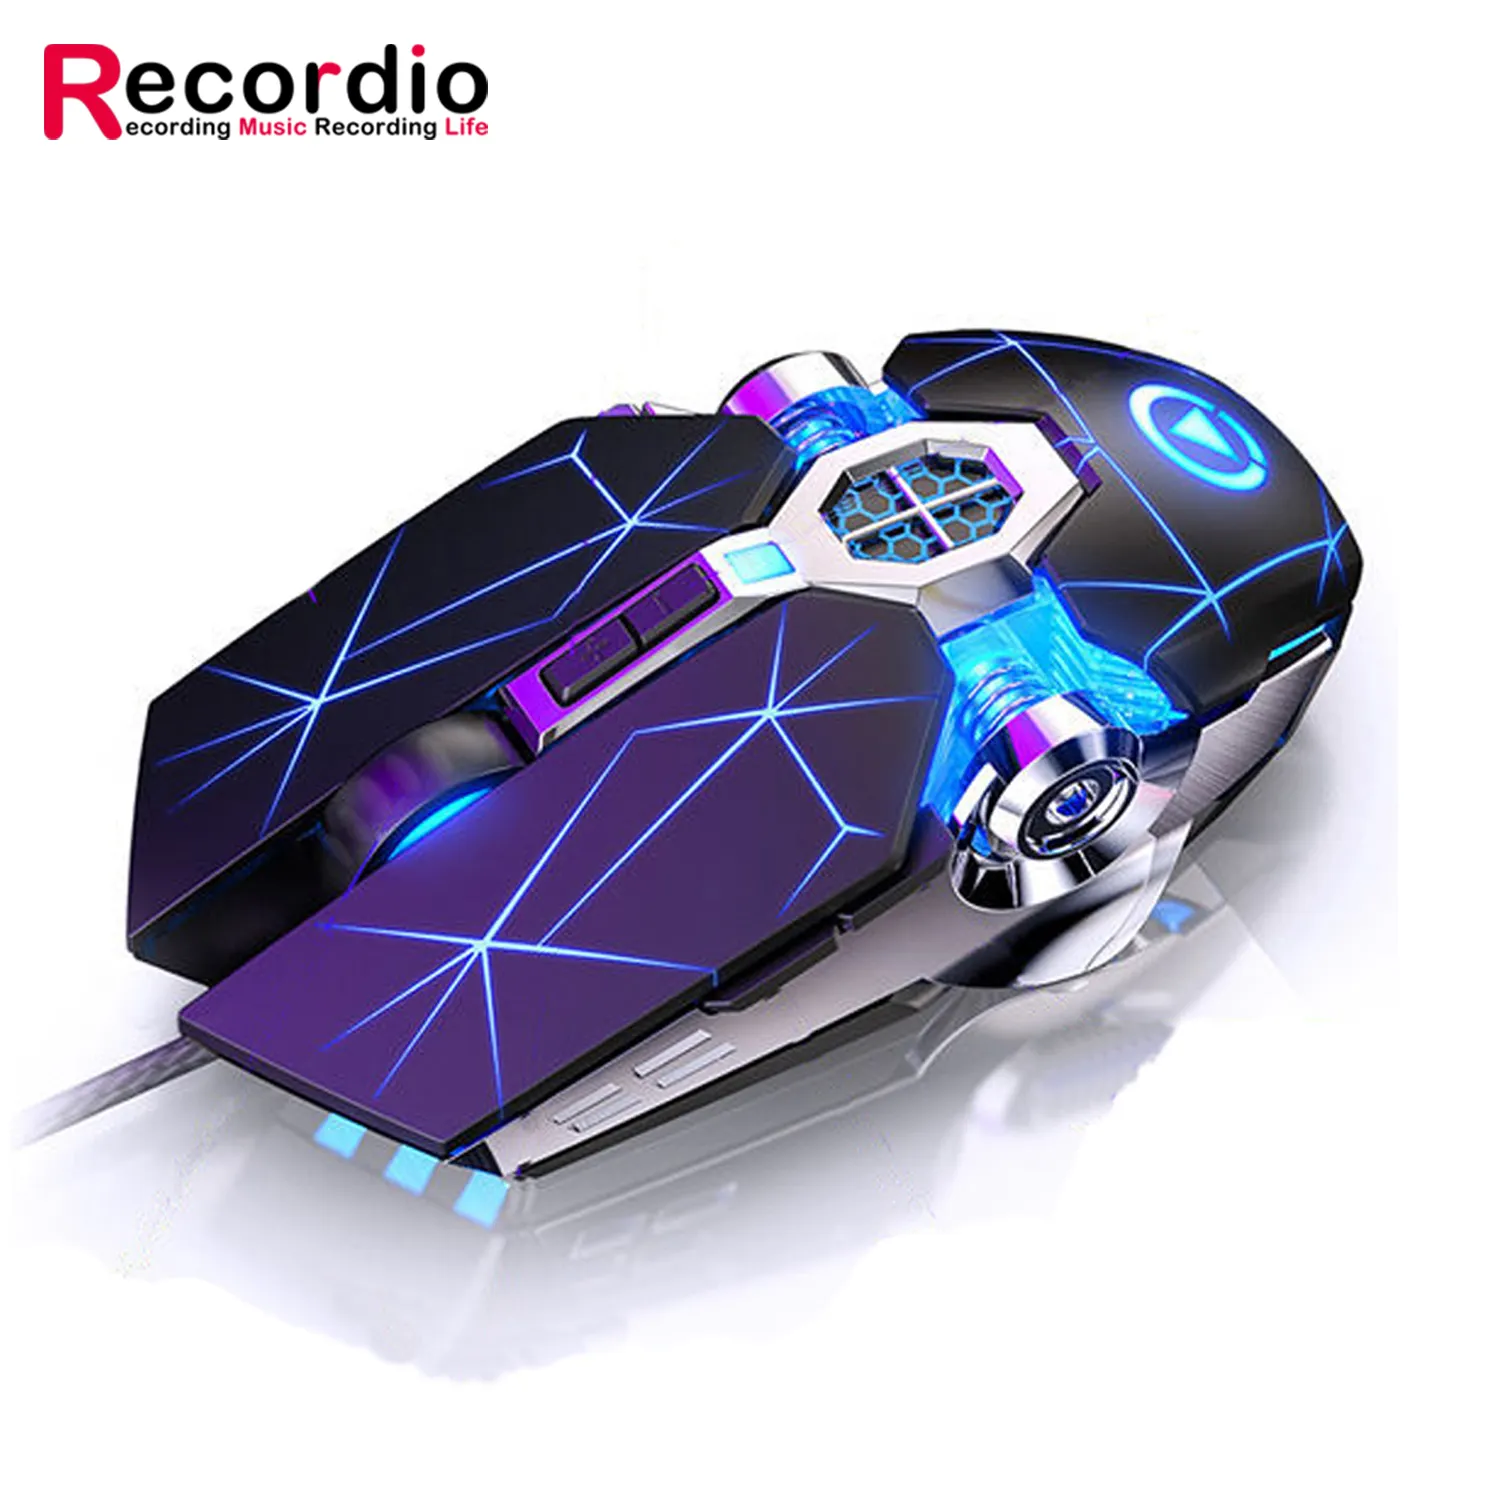 GAZ-M08 Wired Gaming Mouse 6 Button 3200DPI LED Optical USB Computer Mouse Game Mice Silent Mouse For PC laptop Game